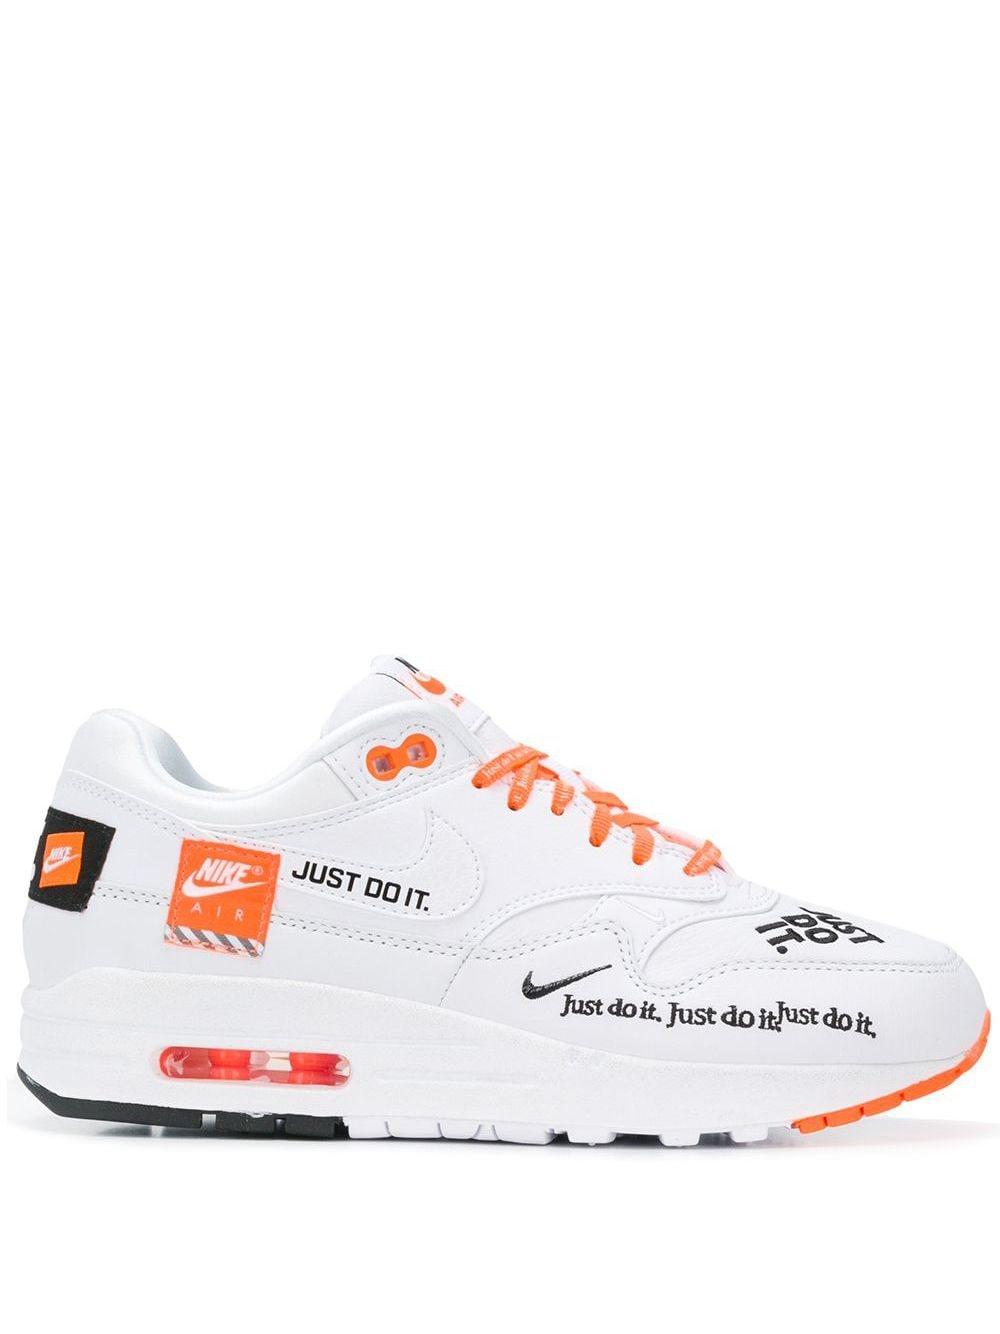 Nike Air Max 1 Lux Just Do It Pack (917691) - SNEAKER SEARCH